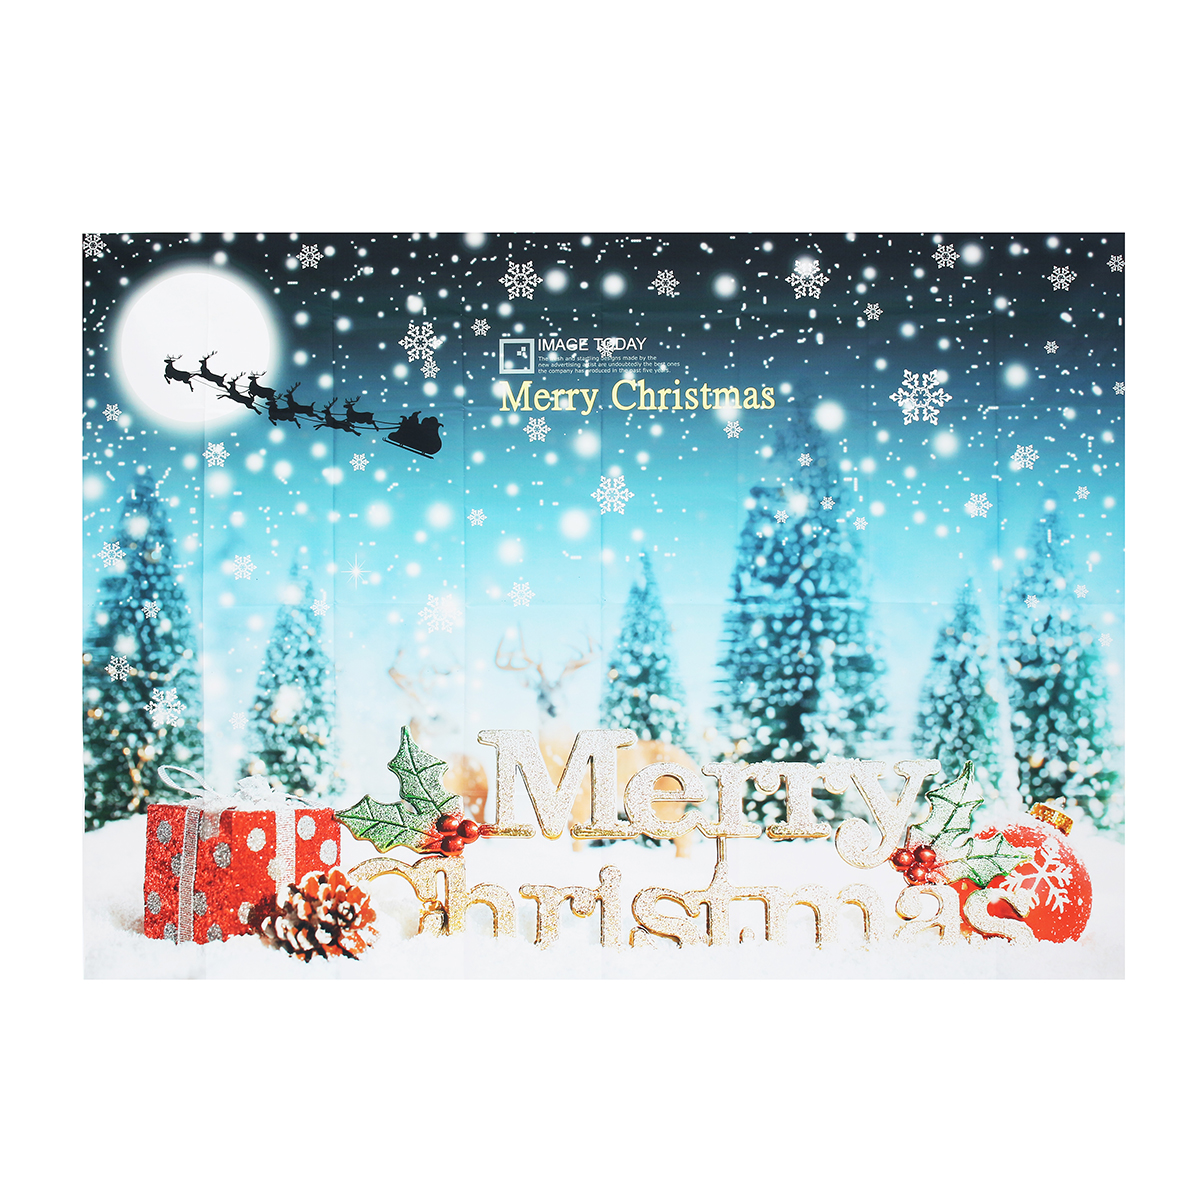 Find 5x7FT Merry Christmas Snow Gift Photography Backdrop Background Studio Prop for Sale on Gipsybee.com with cryptocurrencies